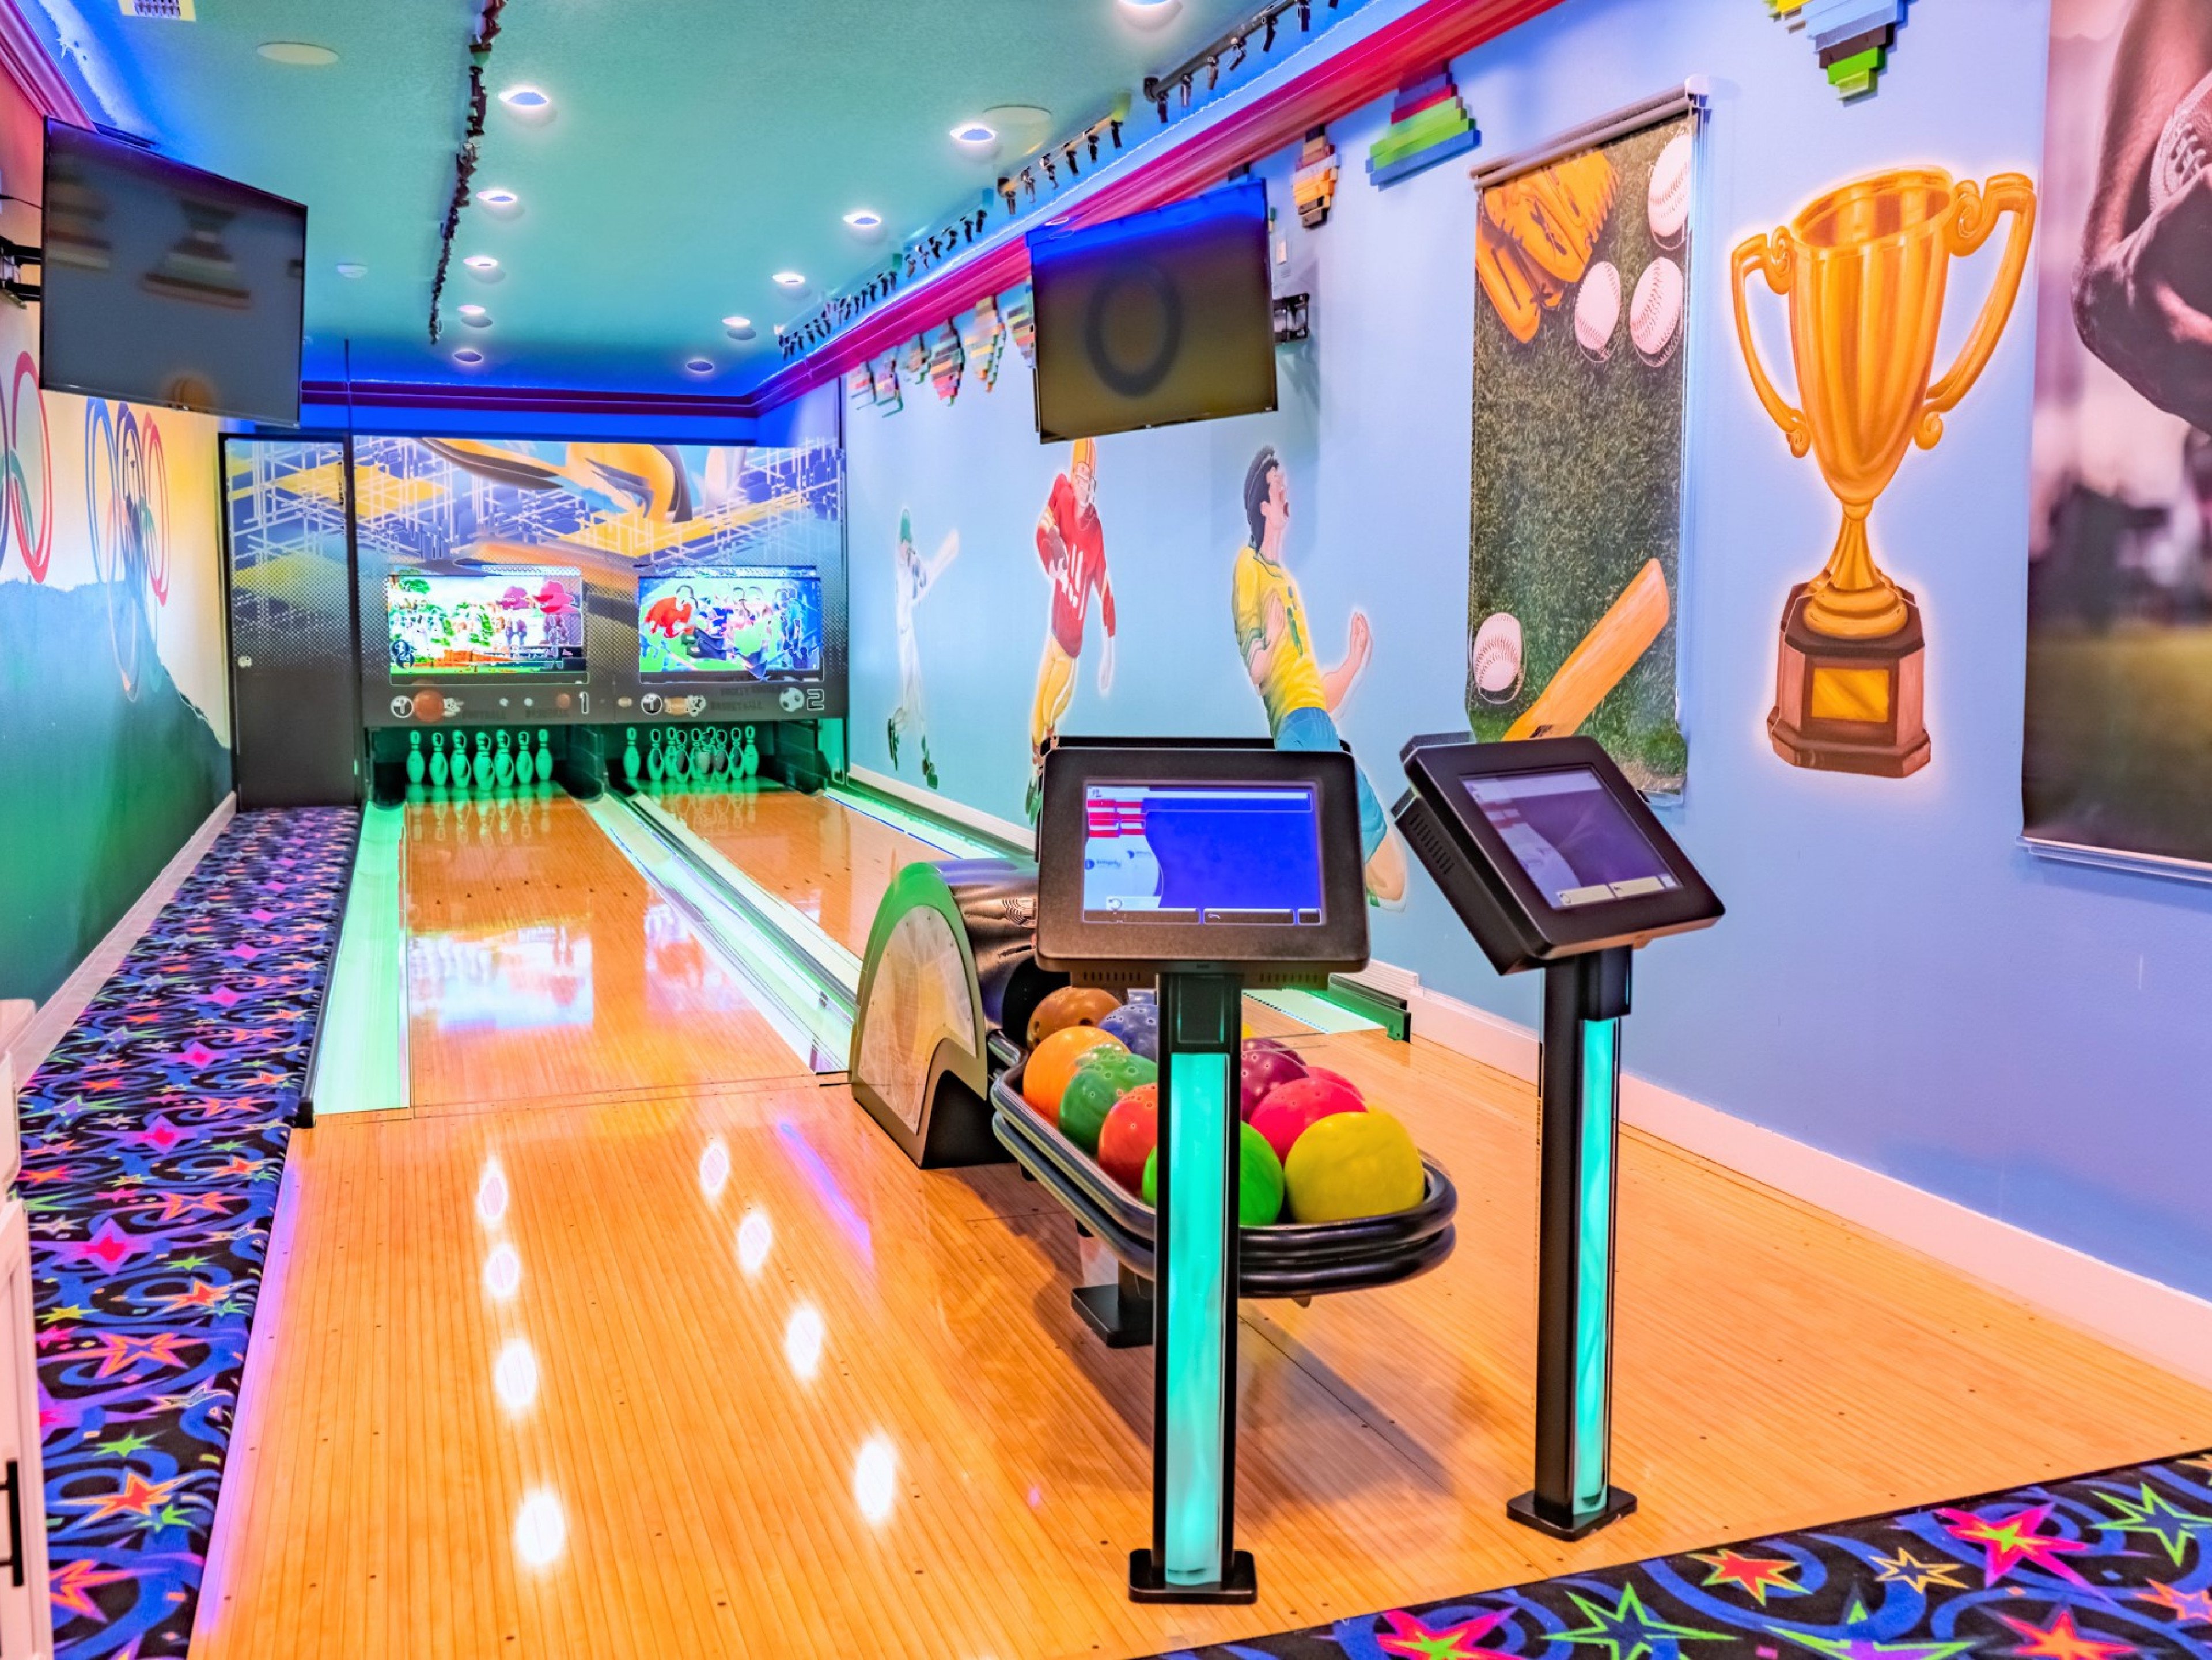 Veranda Palms 6 vacation rentals with bowling alleys